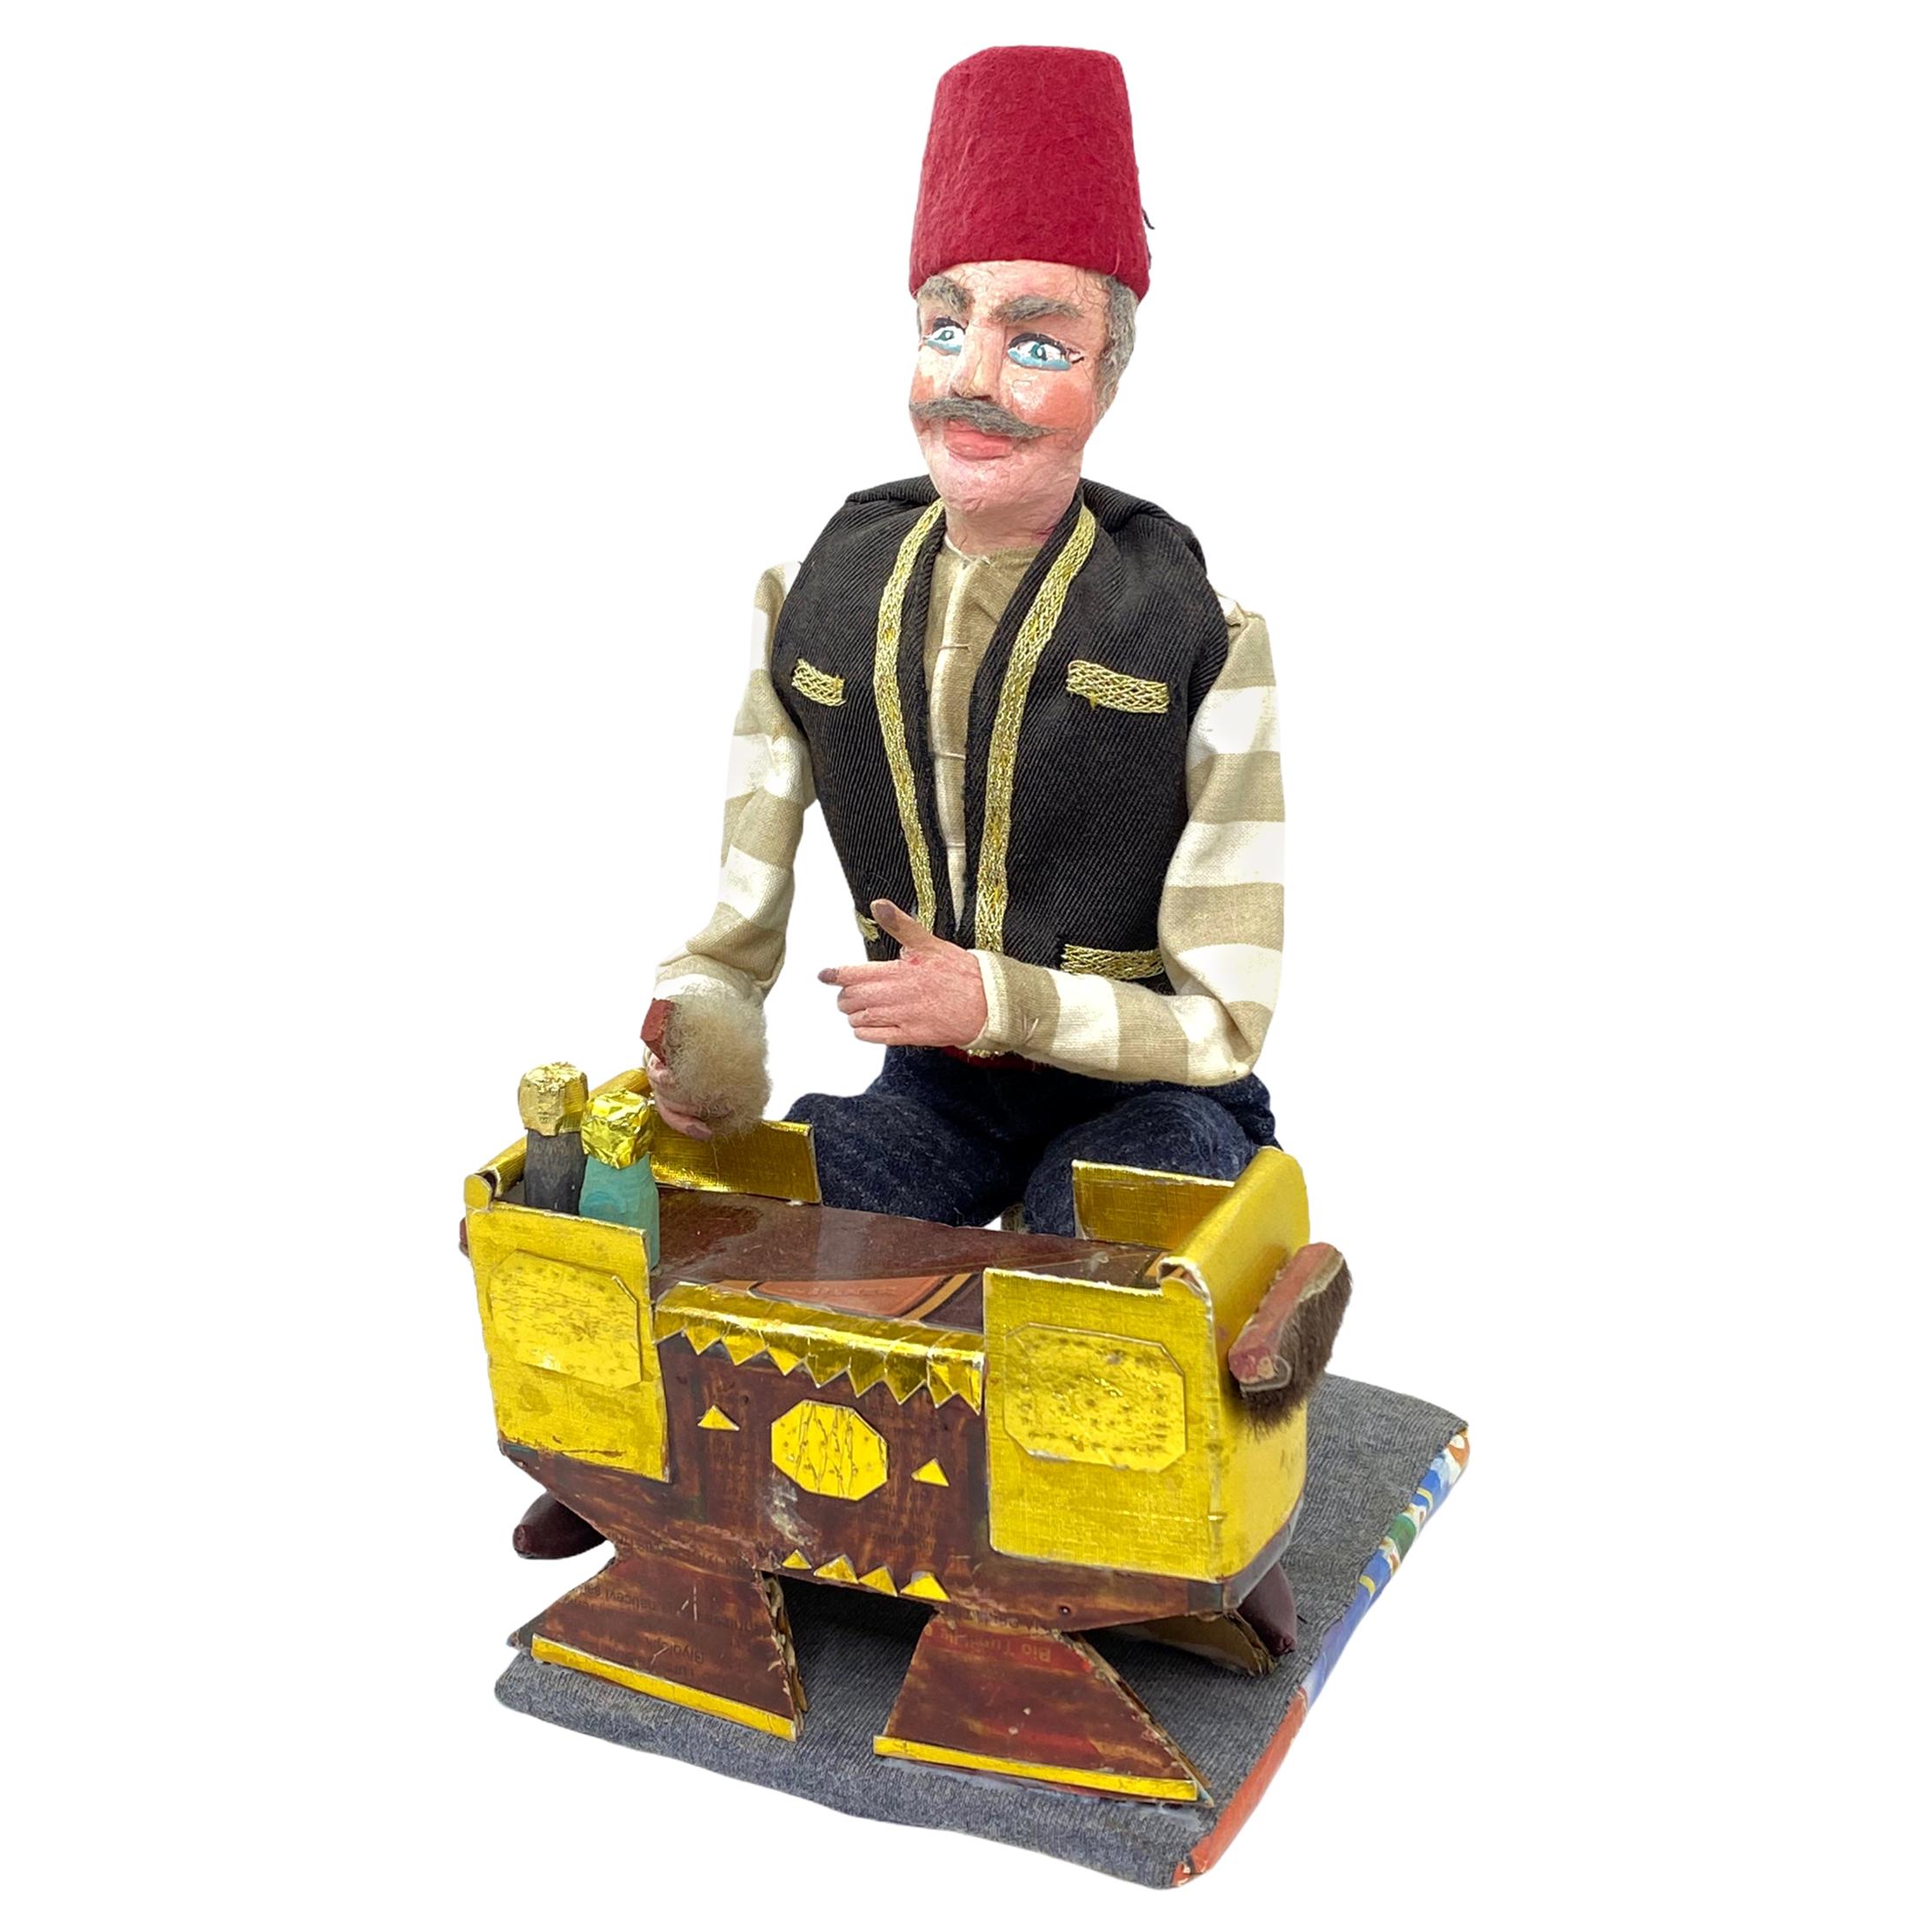 Beautiful Old Oriental Guy Candy Container Secret Chamber Figure, Vintage German